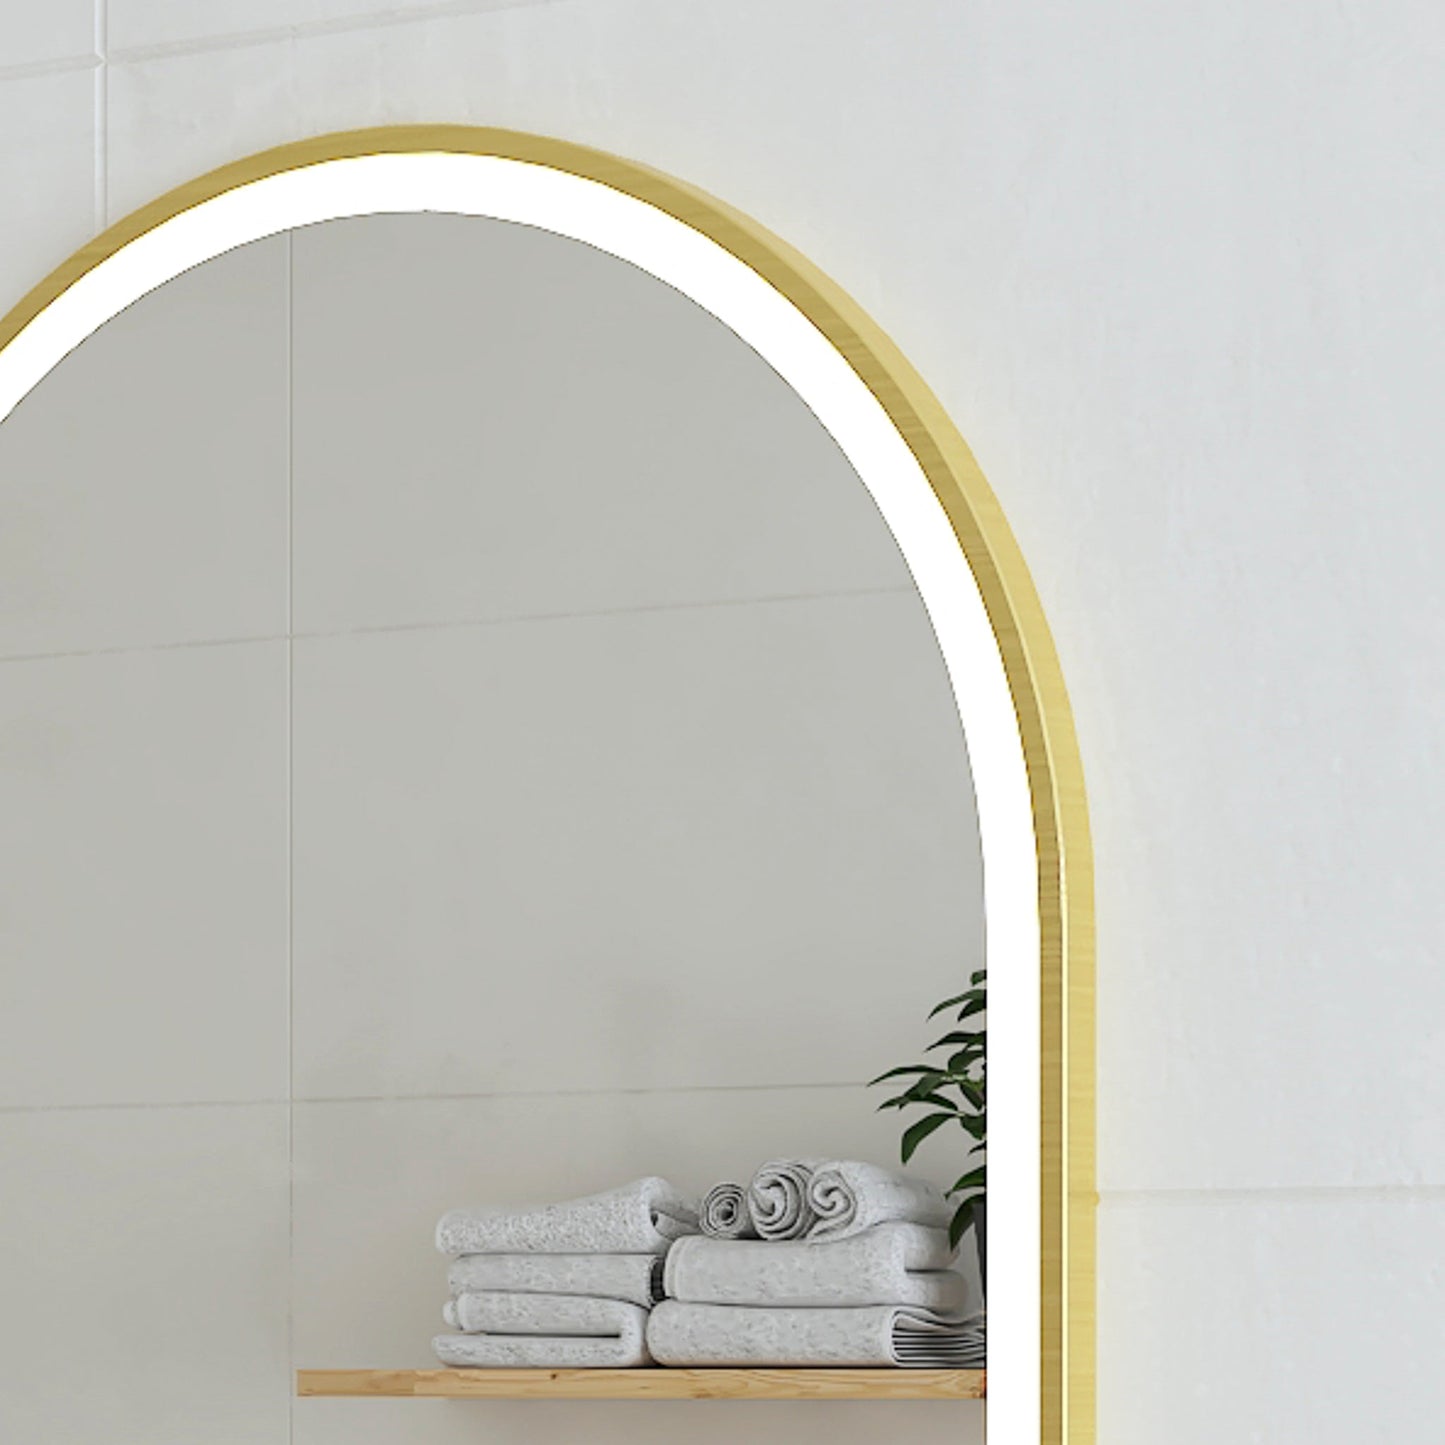 Arco Arch 700mm x 1000mm Frontlit LED Framed Mirror in Brushed Brass (Gold) with Demister